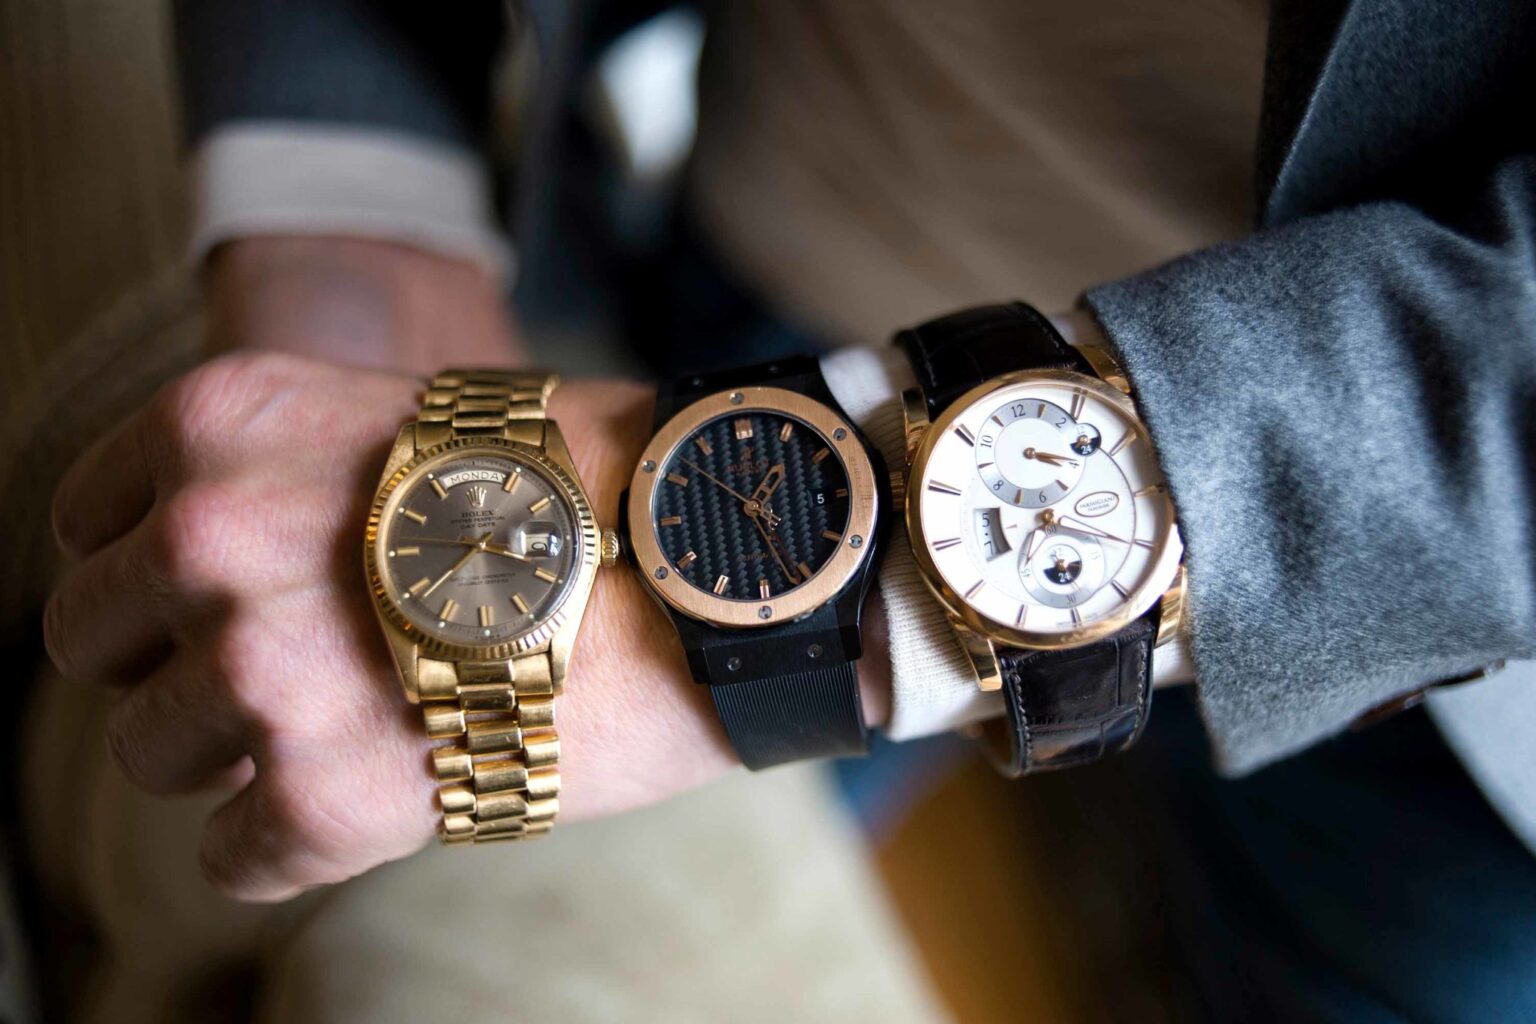 Buying a luxury watch can be a daunting task. Here are some tips on how to get the luxury watch that best suits you.